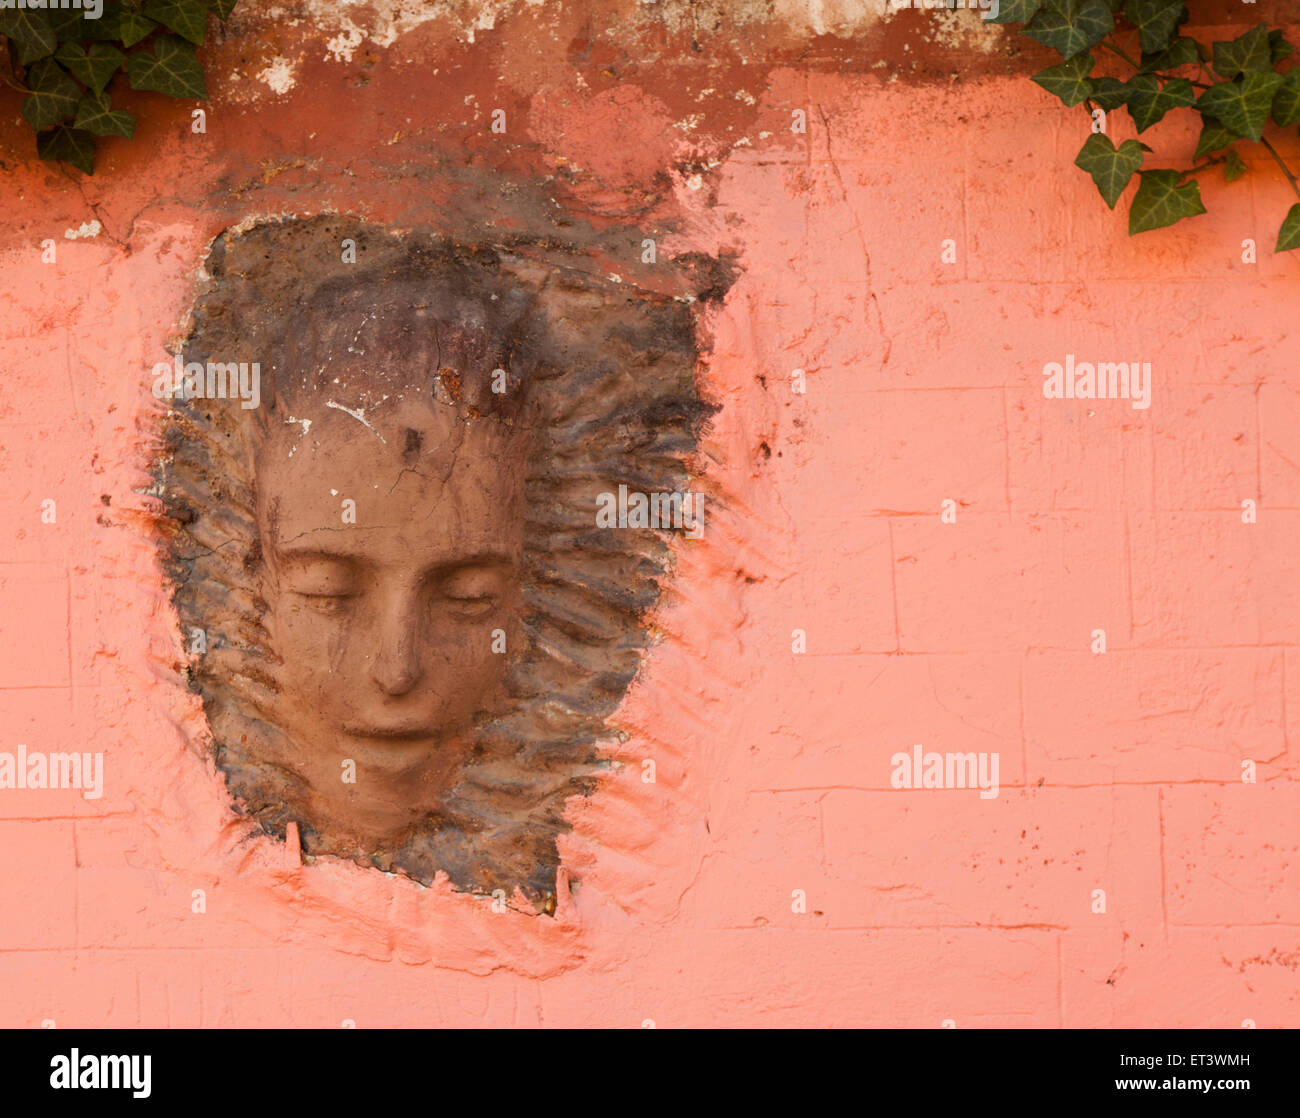 A relief of a head on the wall of the Lapin Agile, a cabaret club in Montmartre, Paris France Stock Photo